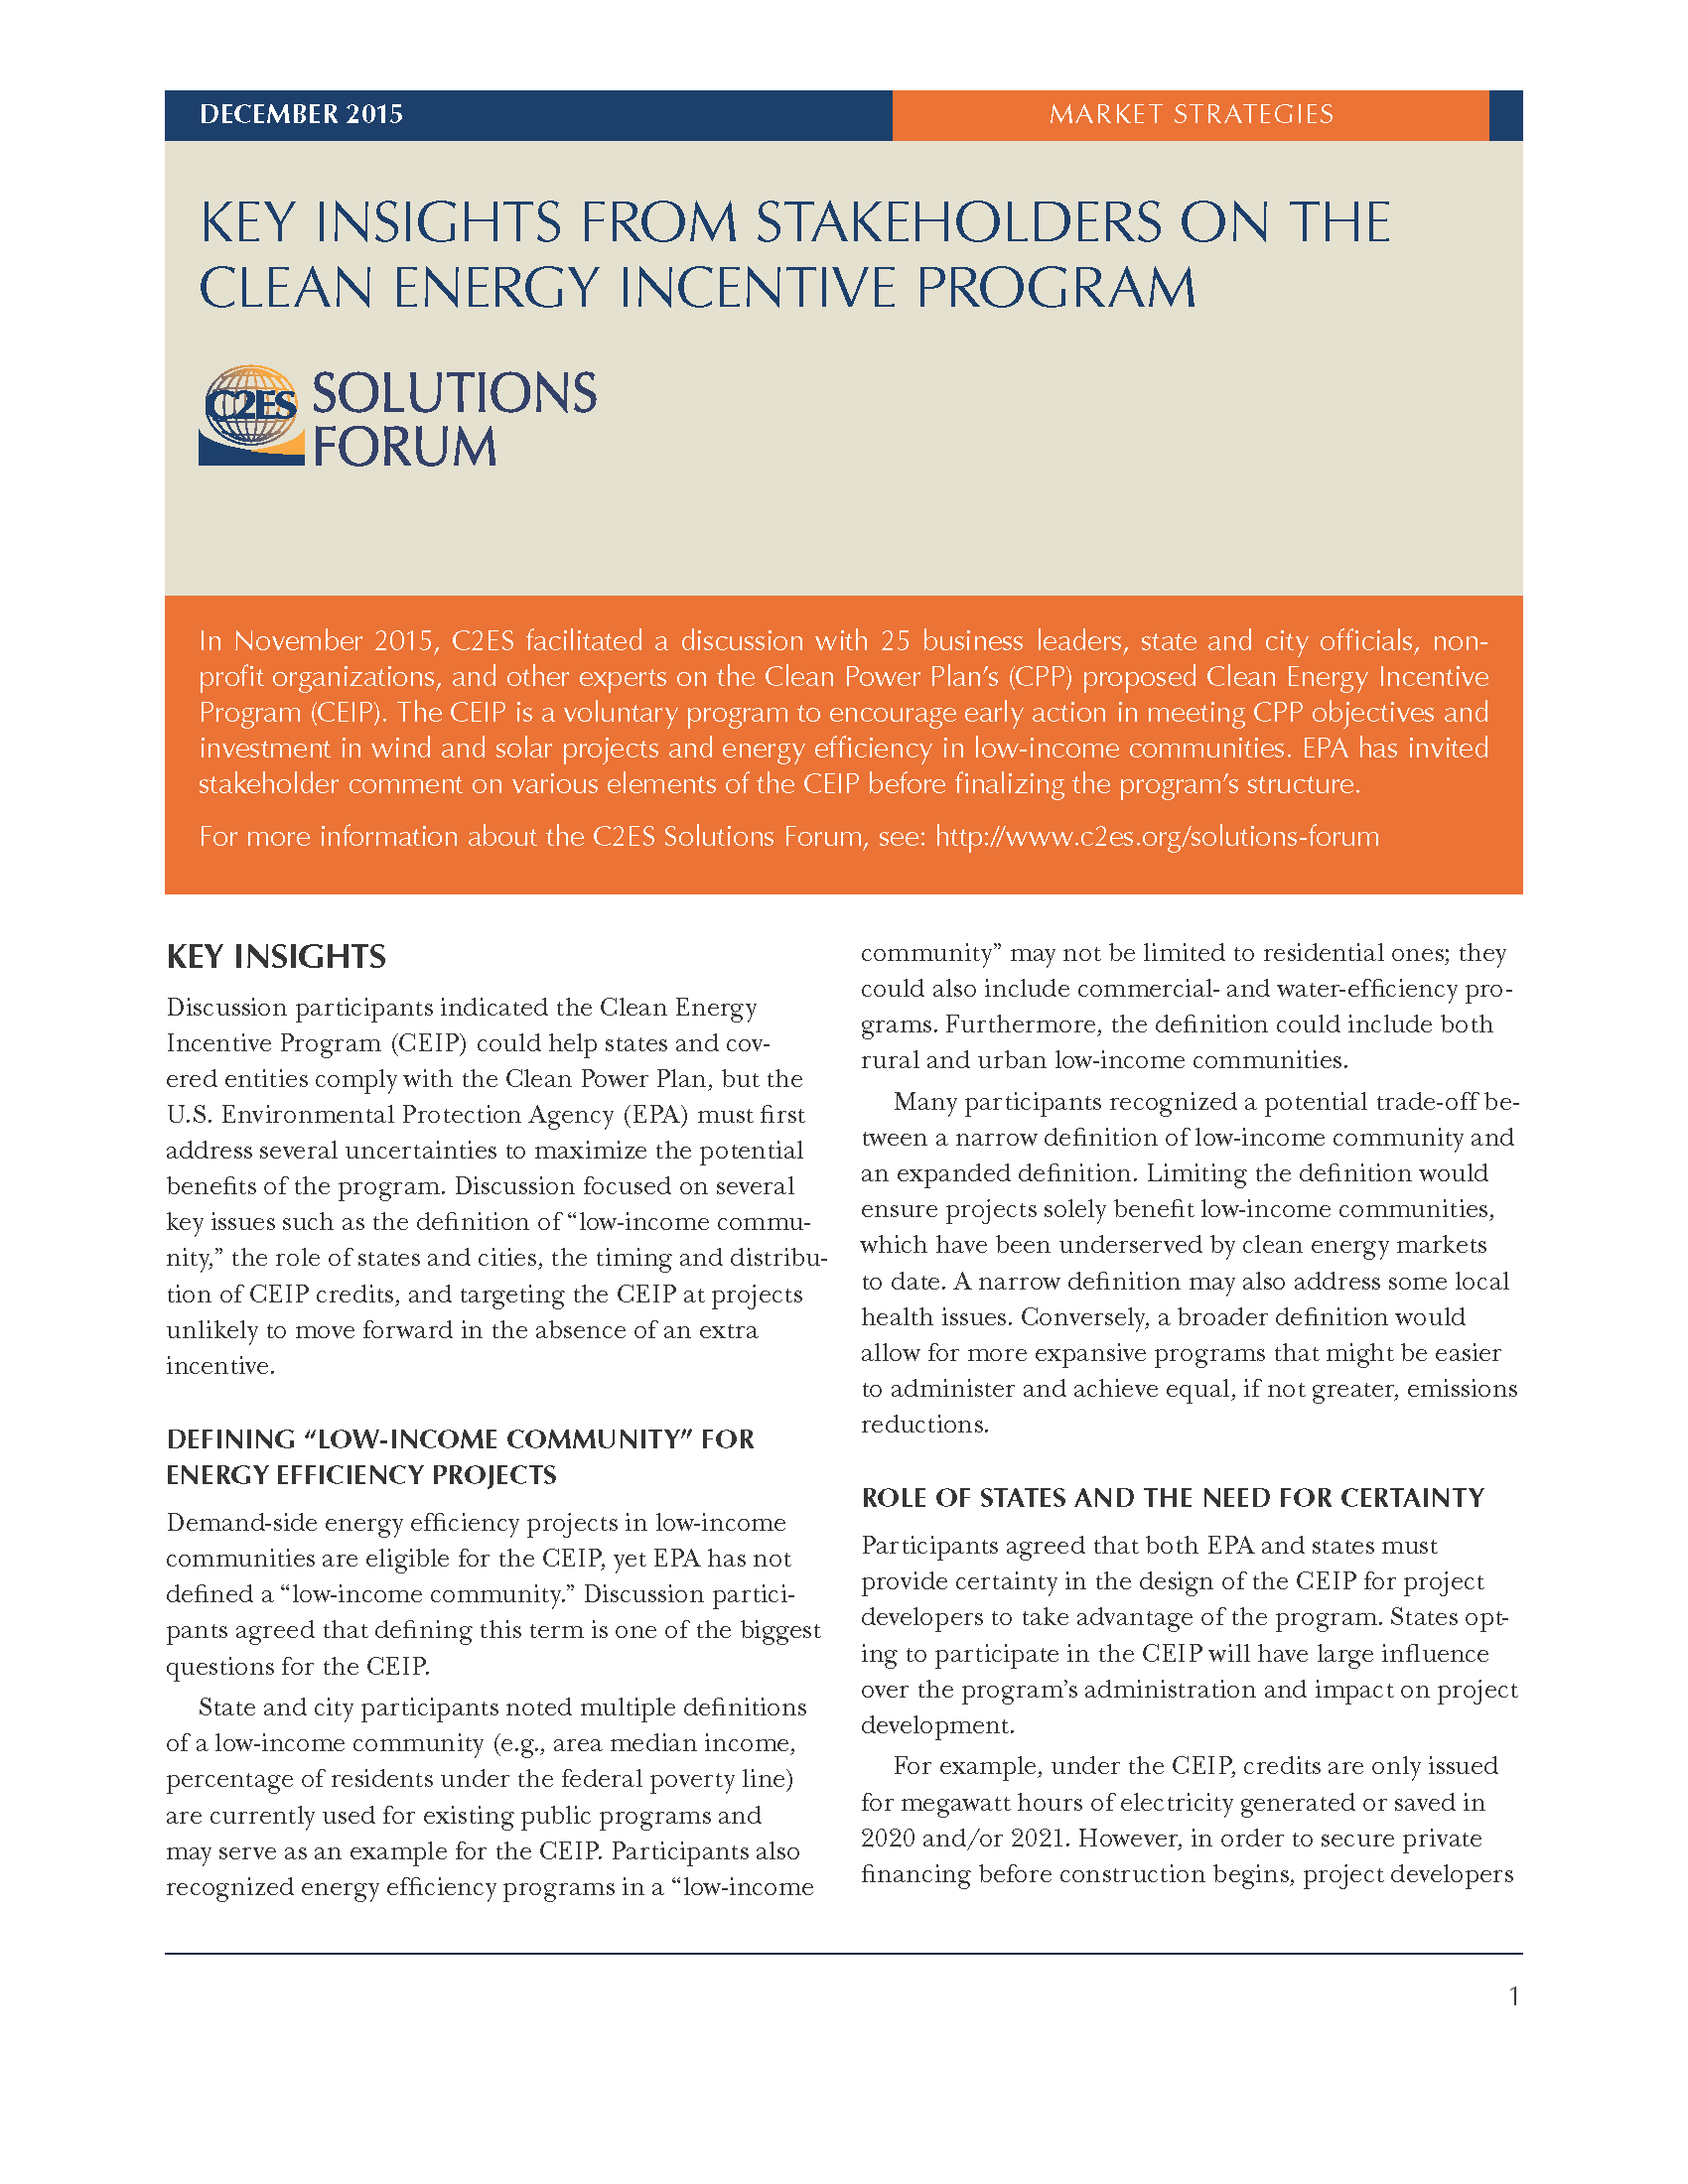 key-insights-from-stakeholders-on-the-clean-energy-incentive-program